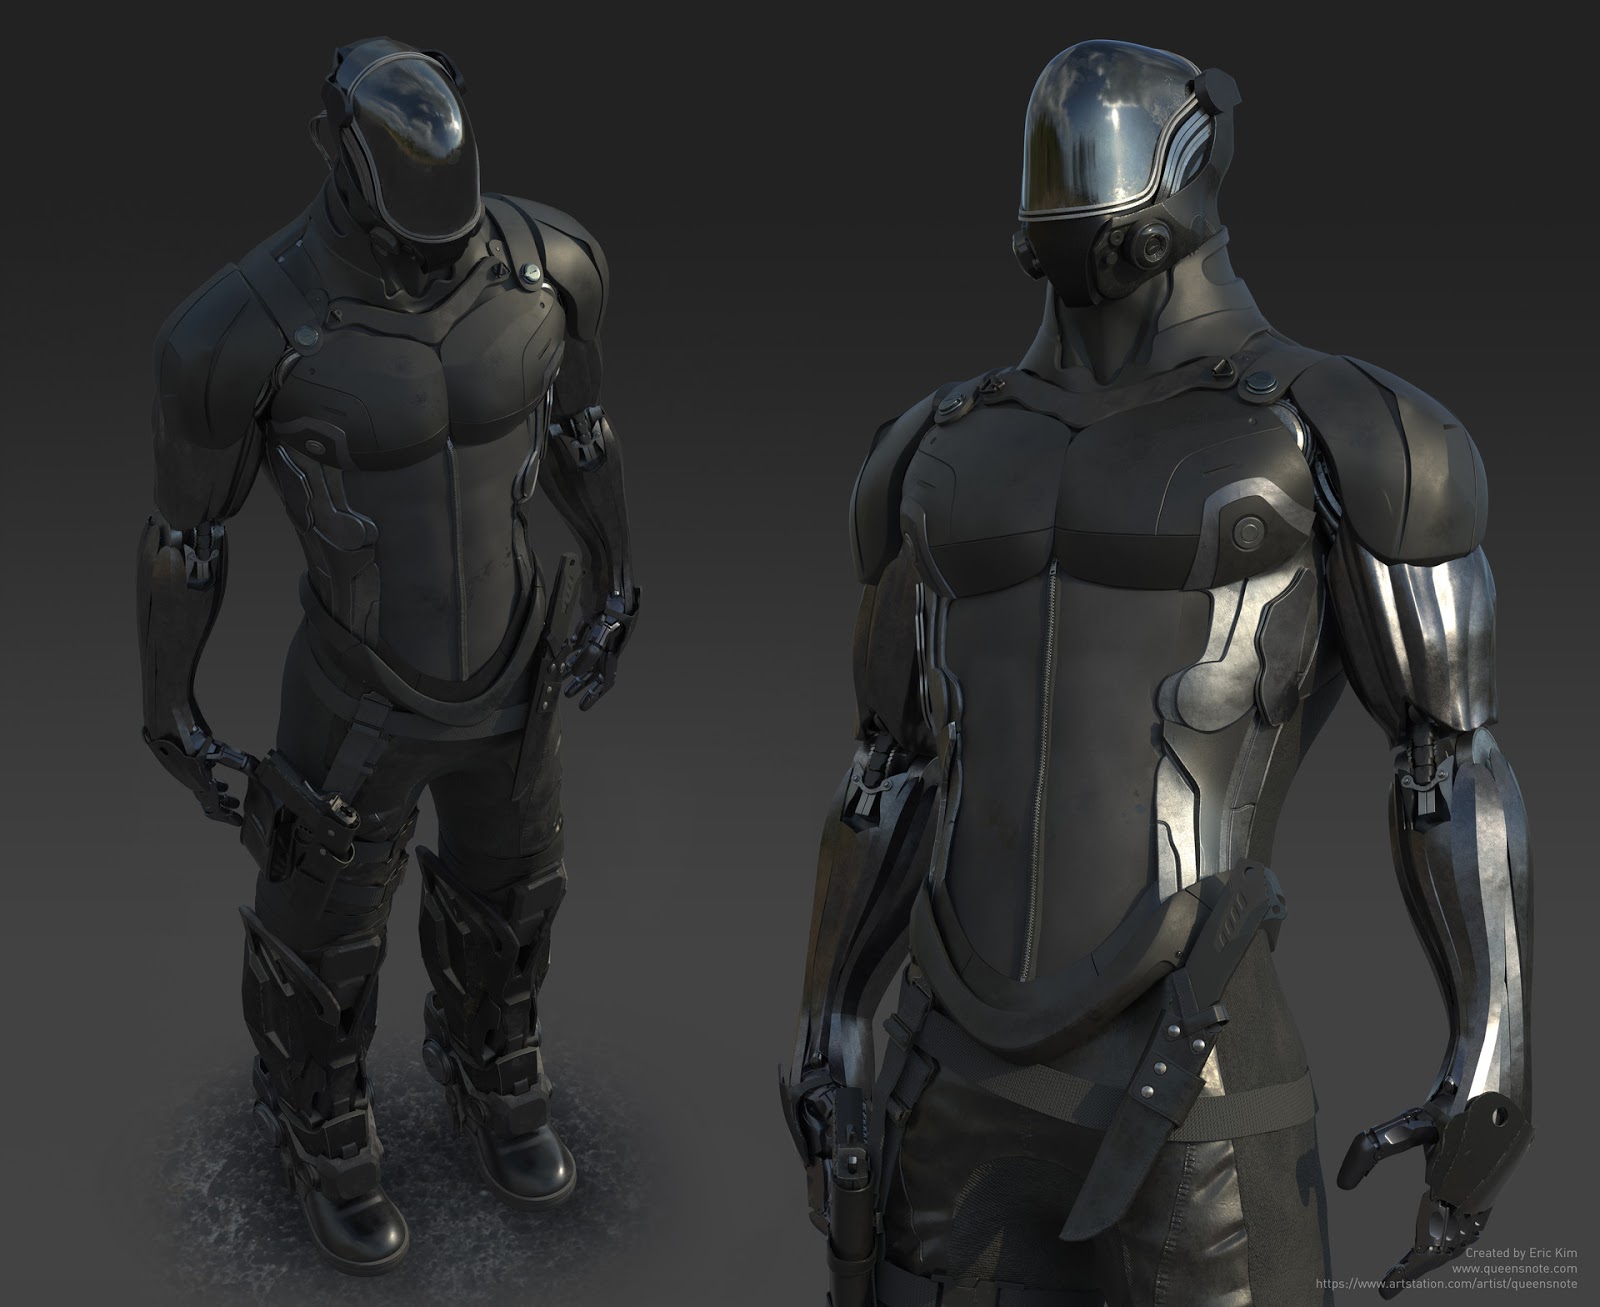 Images: Sci-Fi Character Concept Art From Eric Kim.